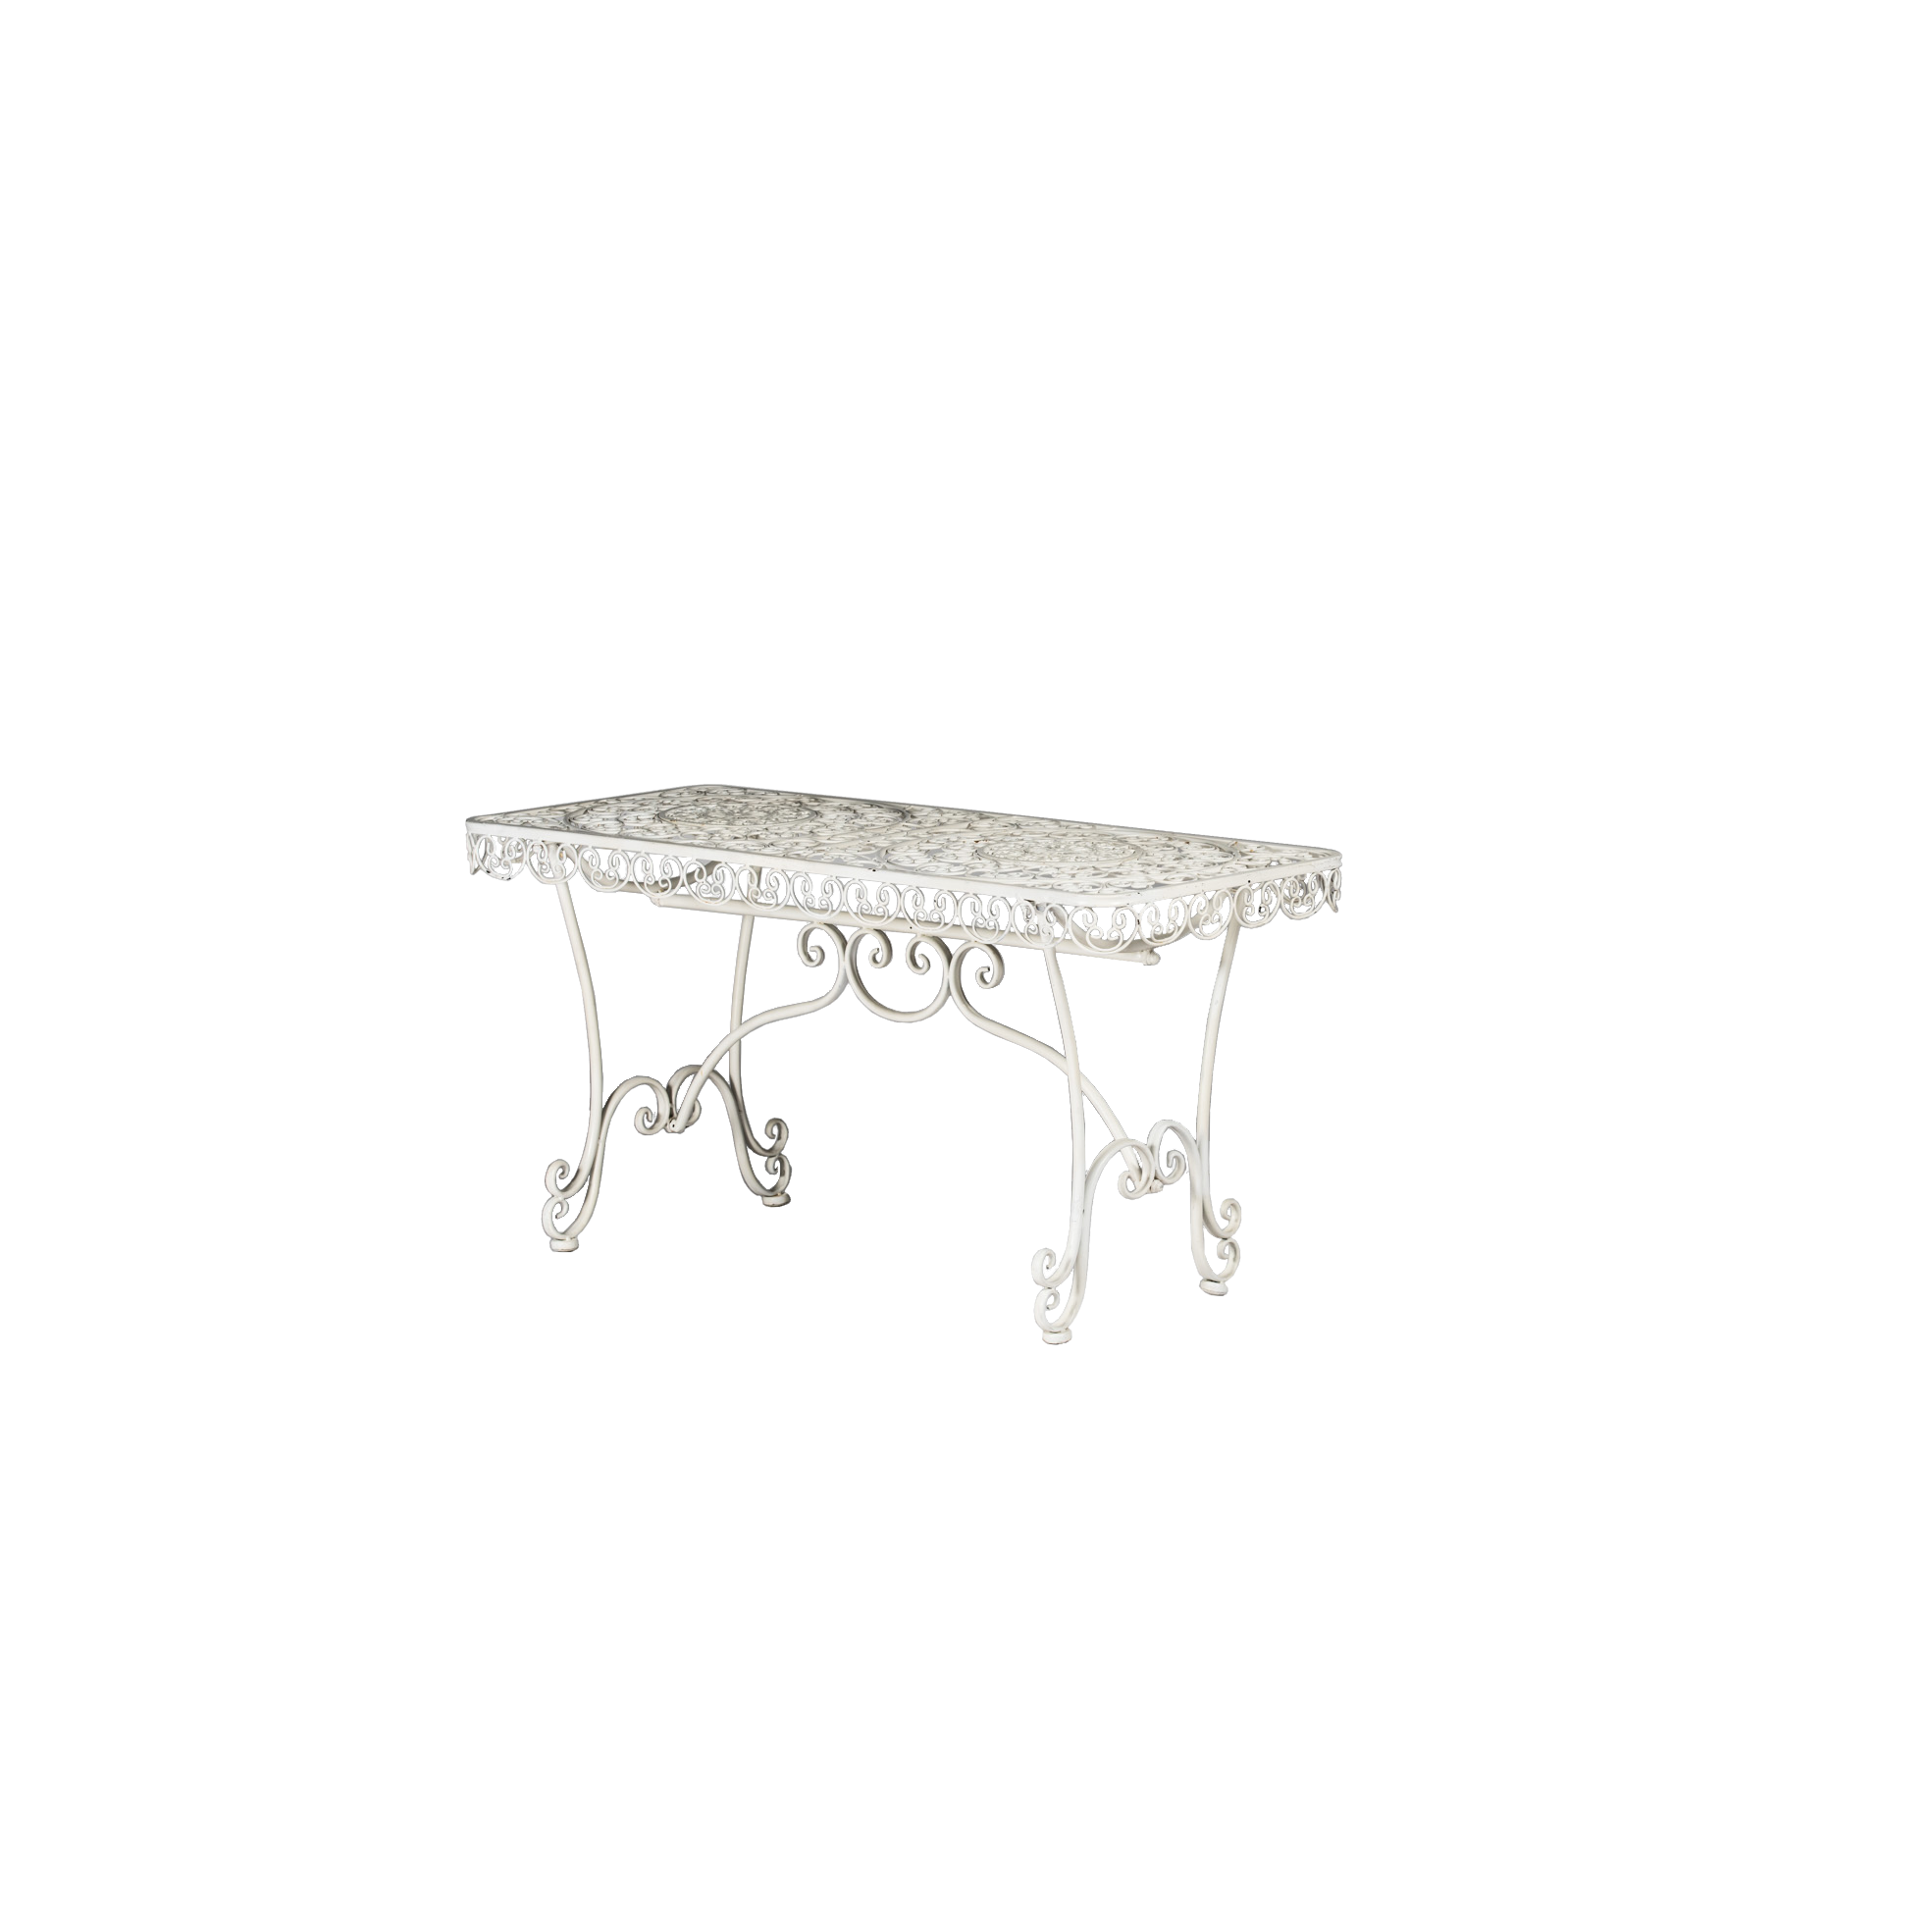 COFFEE TABLE Wrought Iron mod. Bellevue in white